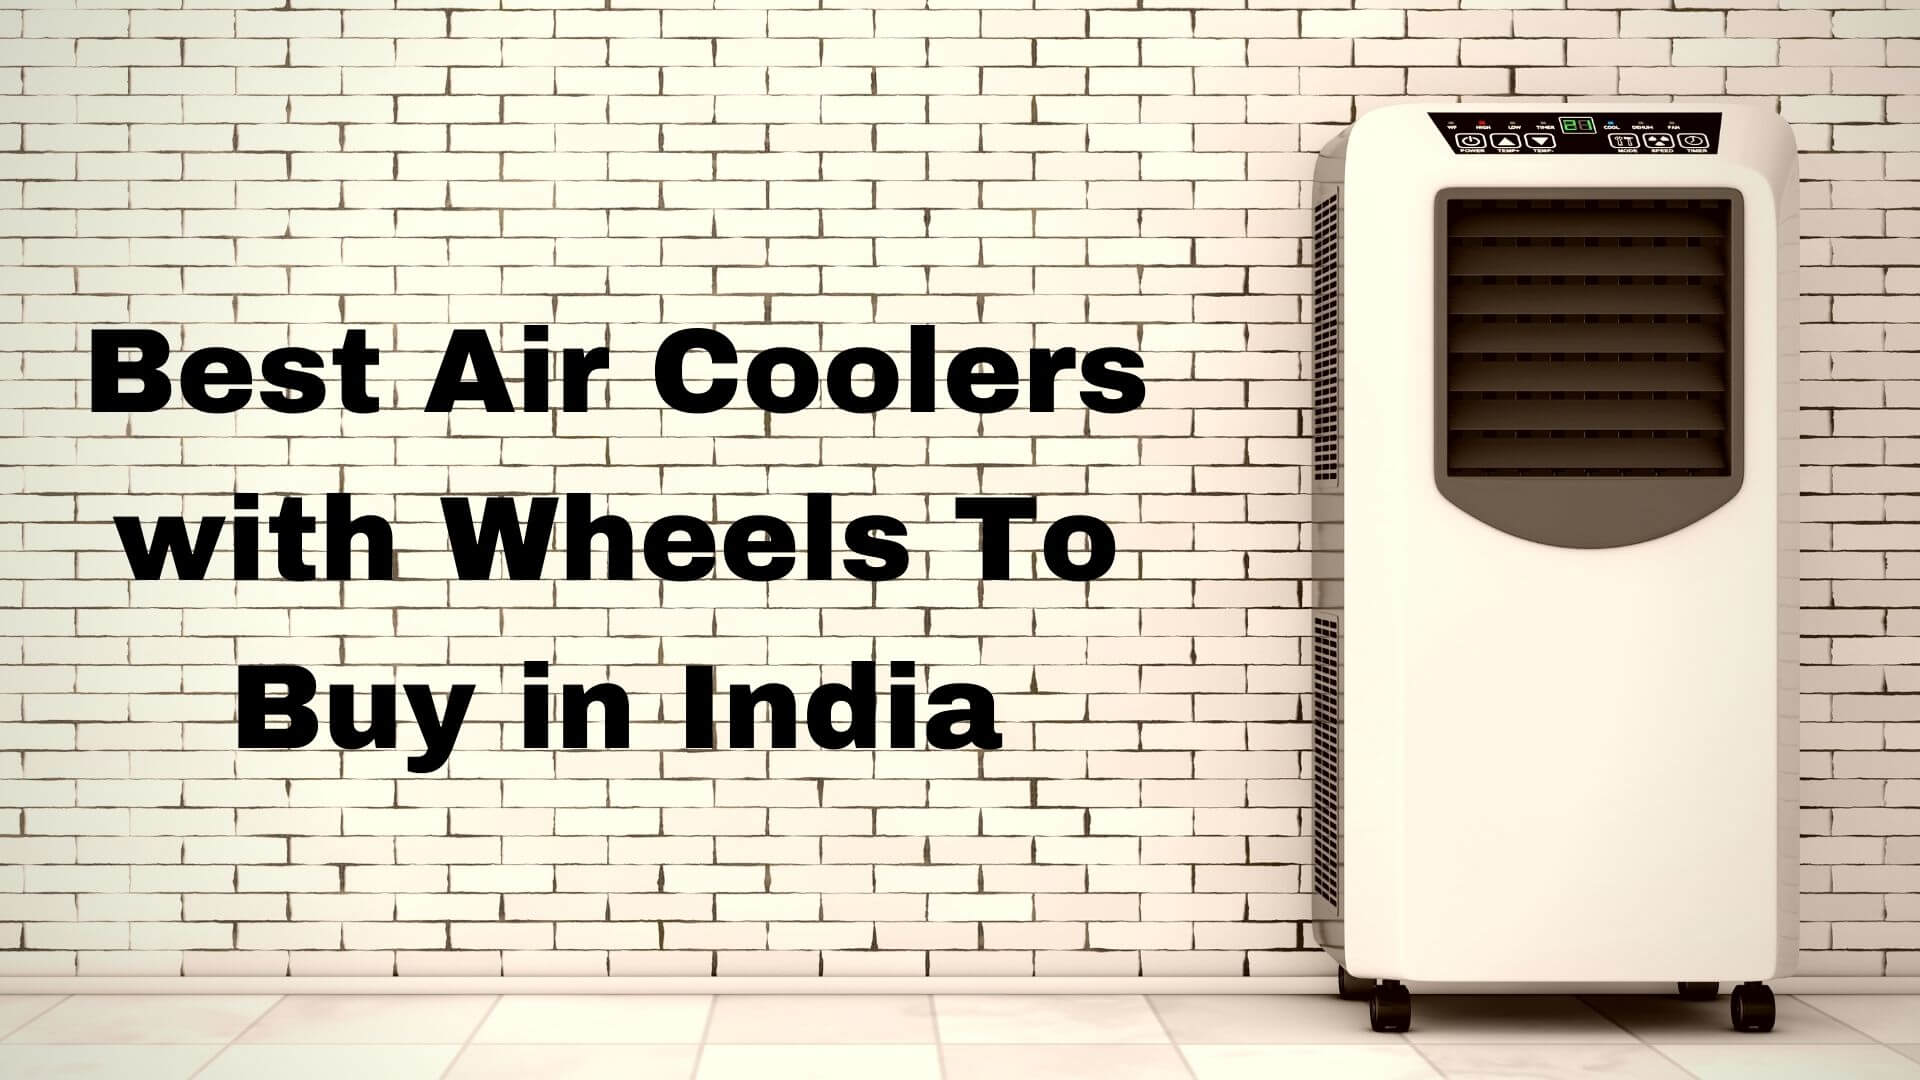 Top Best Air Coolers with Wheels To Buy in India